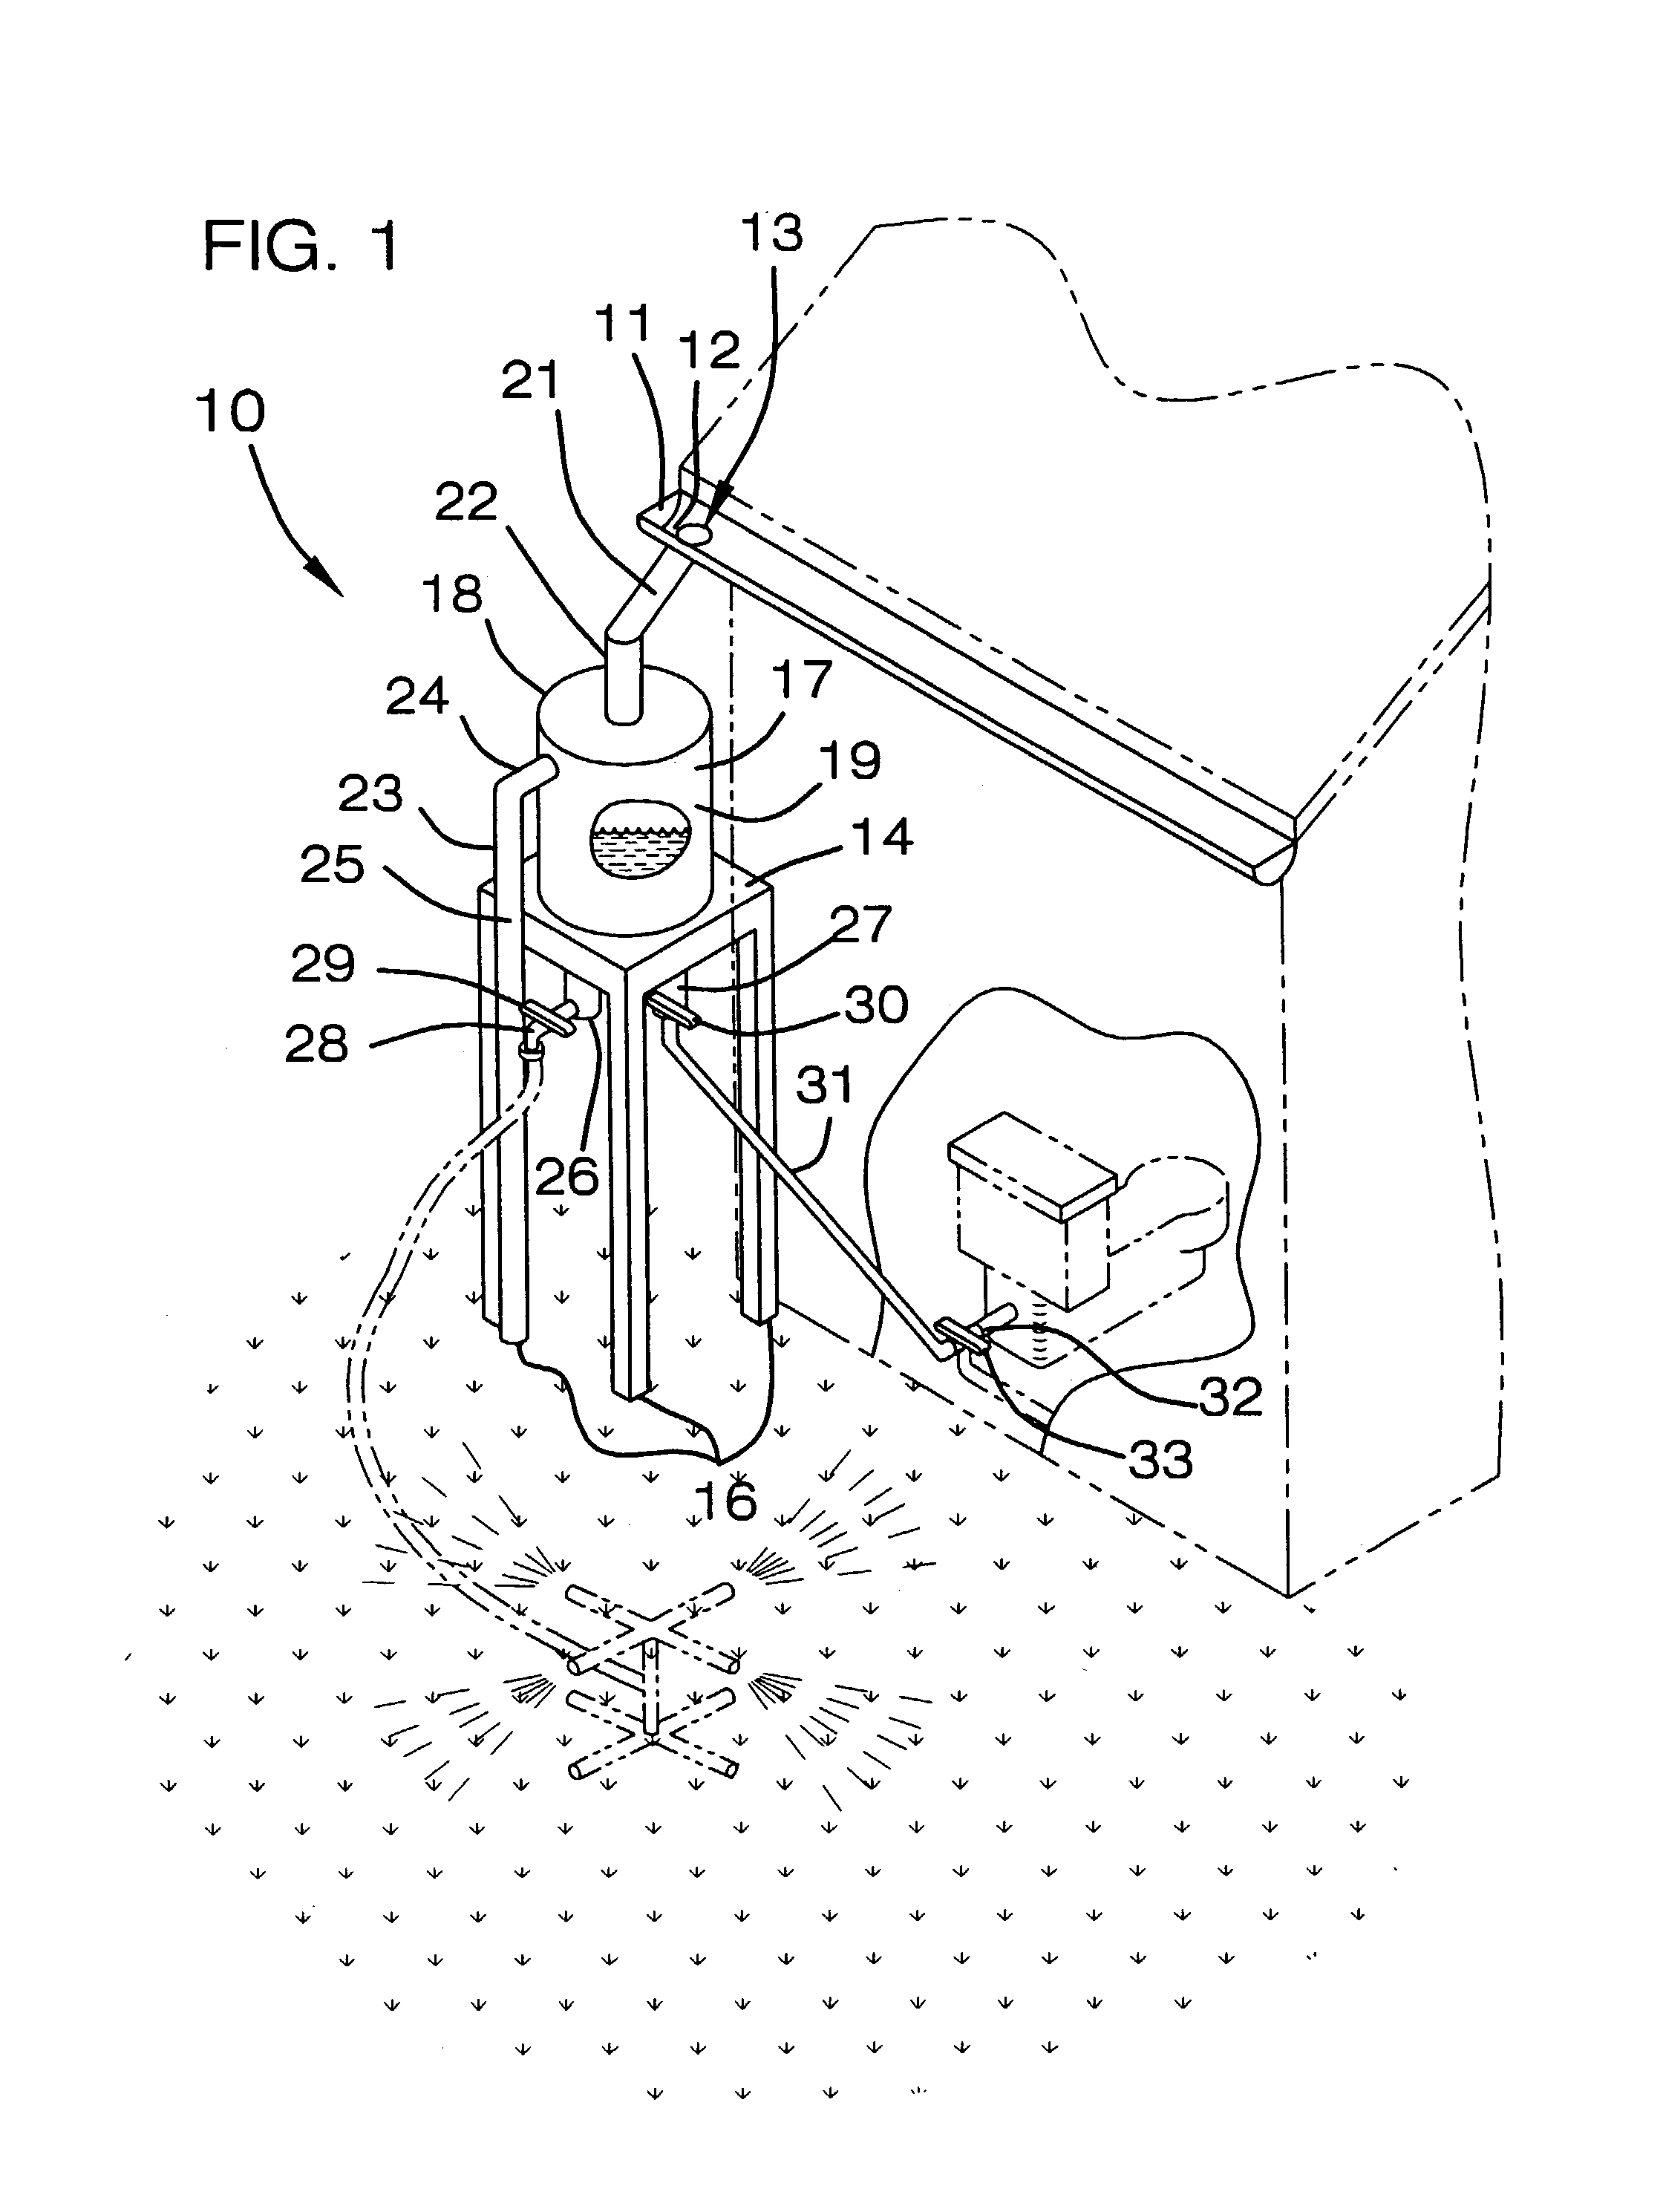 Rainwater collection and dispensation system